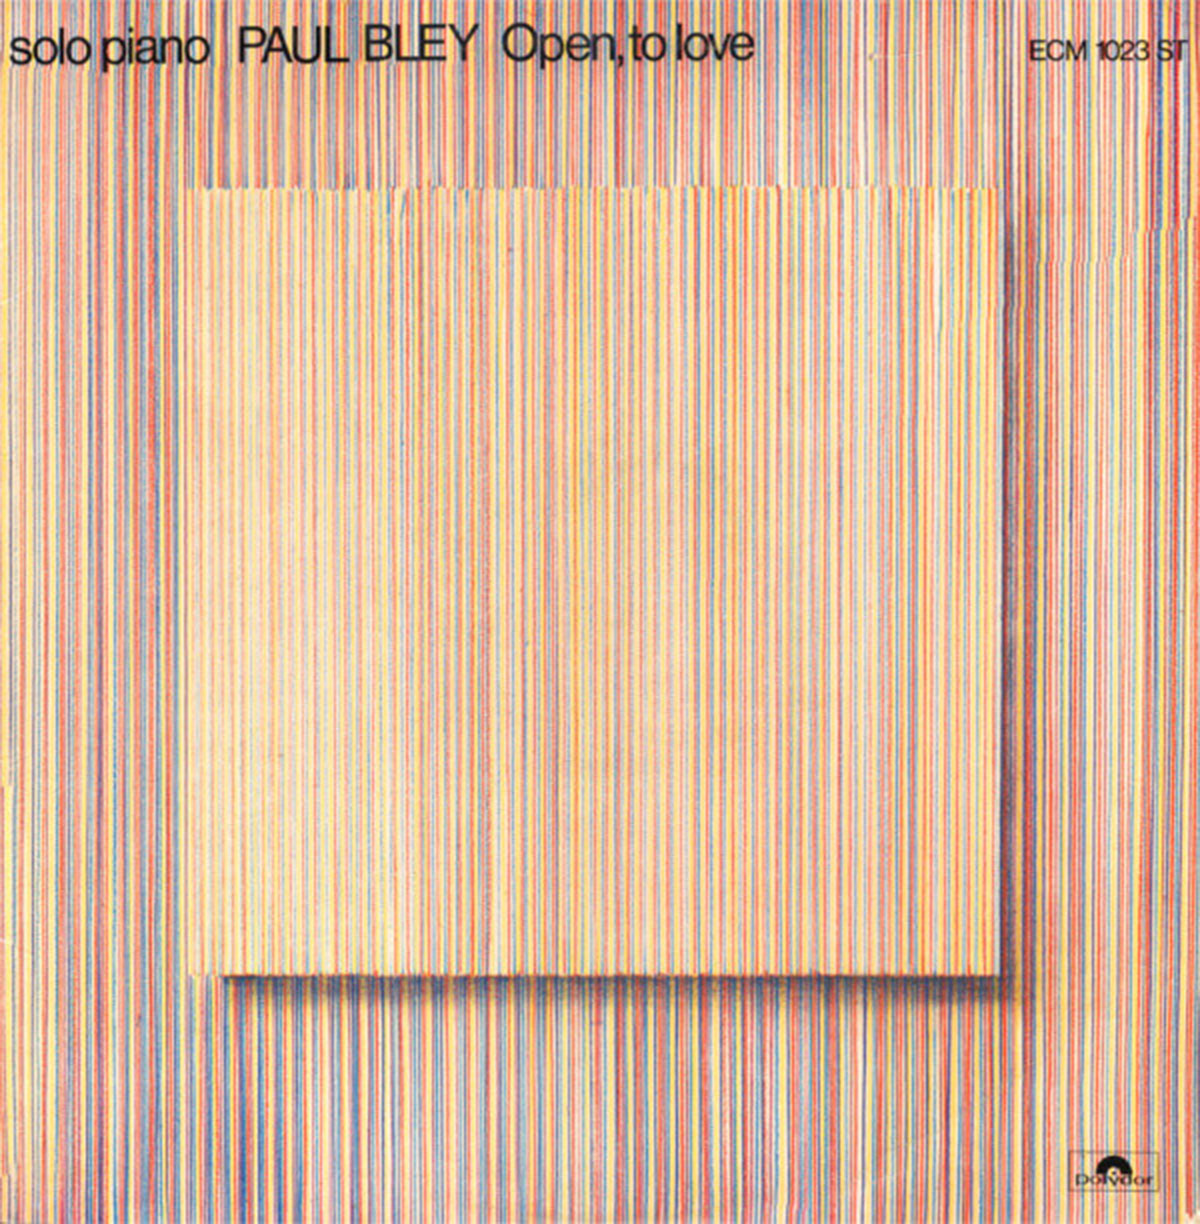 Paul Bley ‎– Open, To Love - US Pressing